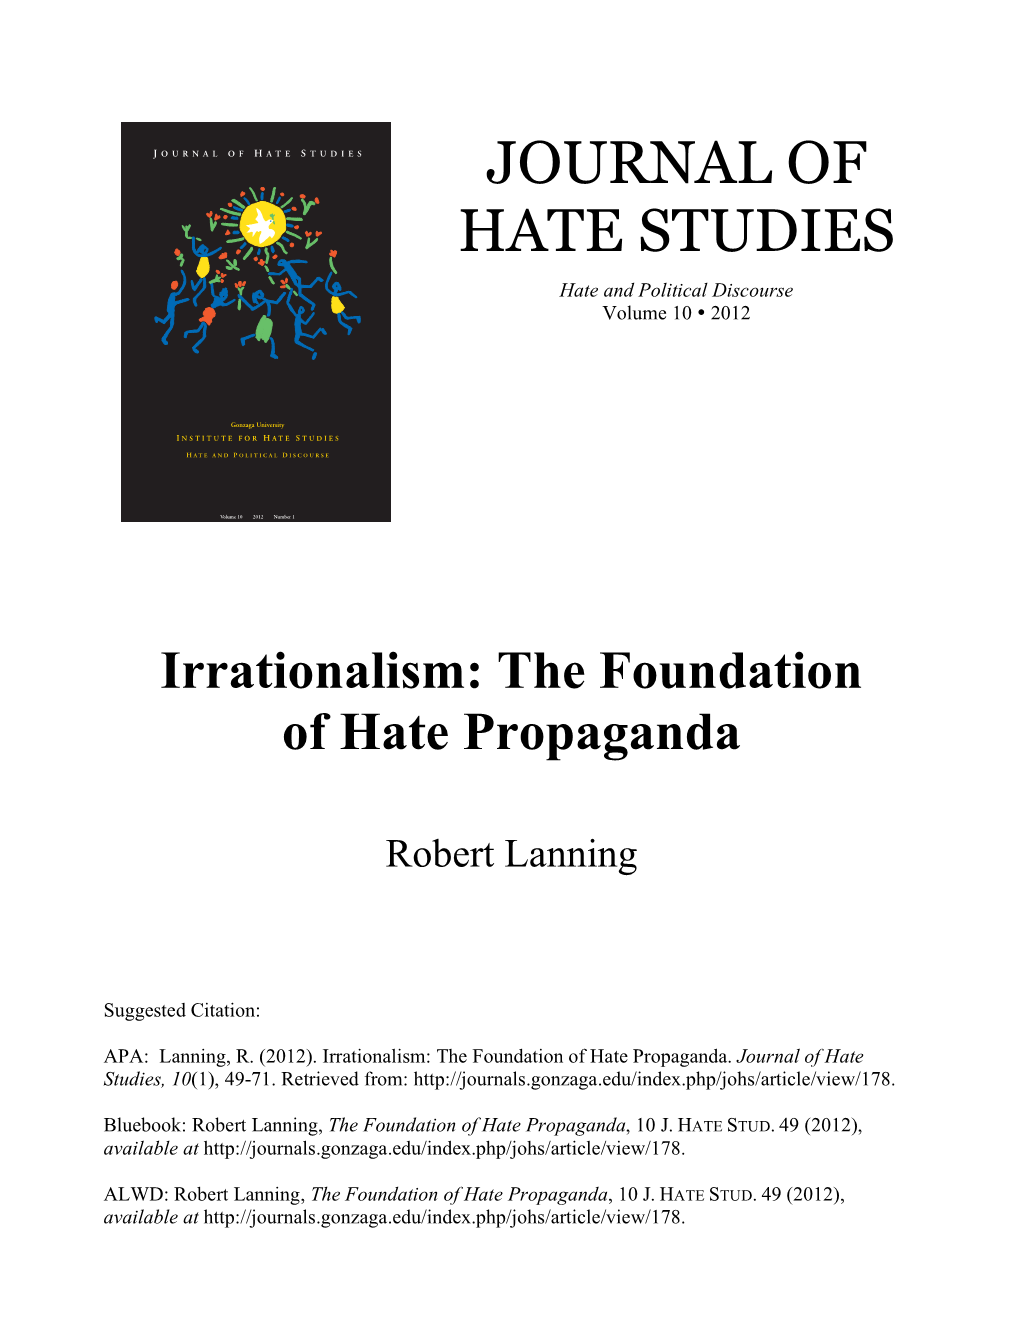 JOURNAL of HATE STUDIES J OURNAL of H ATE S TUDIES JOURNAL of HATE STUDIES Hate and Political Discourse Volume 10 ! 2012